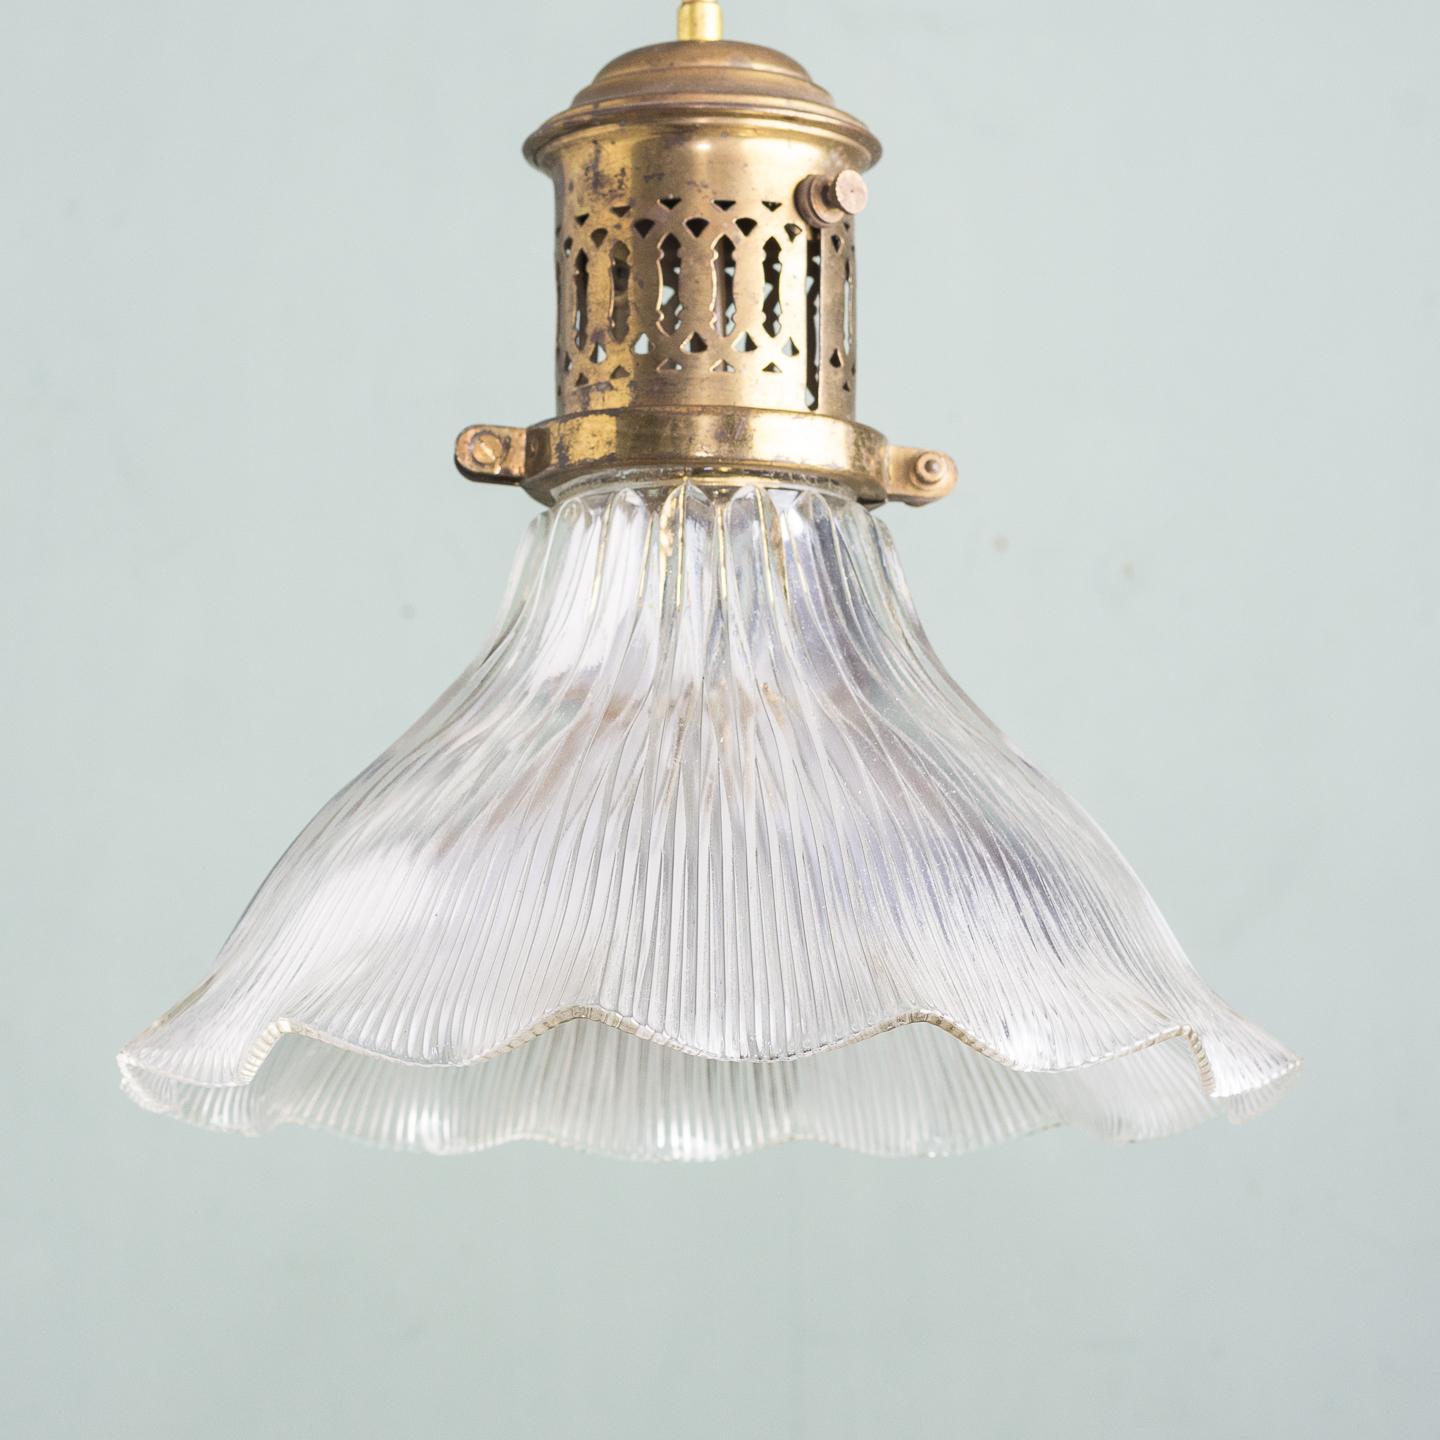 Two Edwardian Holophane pendant lights, the original pierced brass galleries with adjustable mechanism, re-wired.